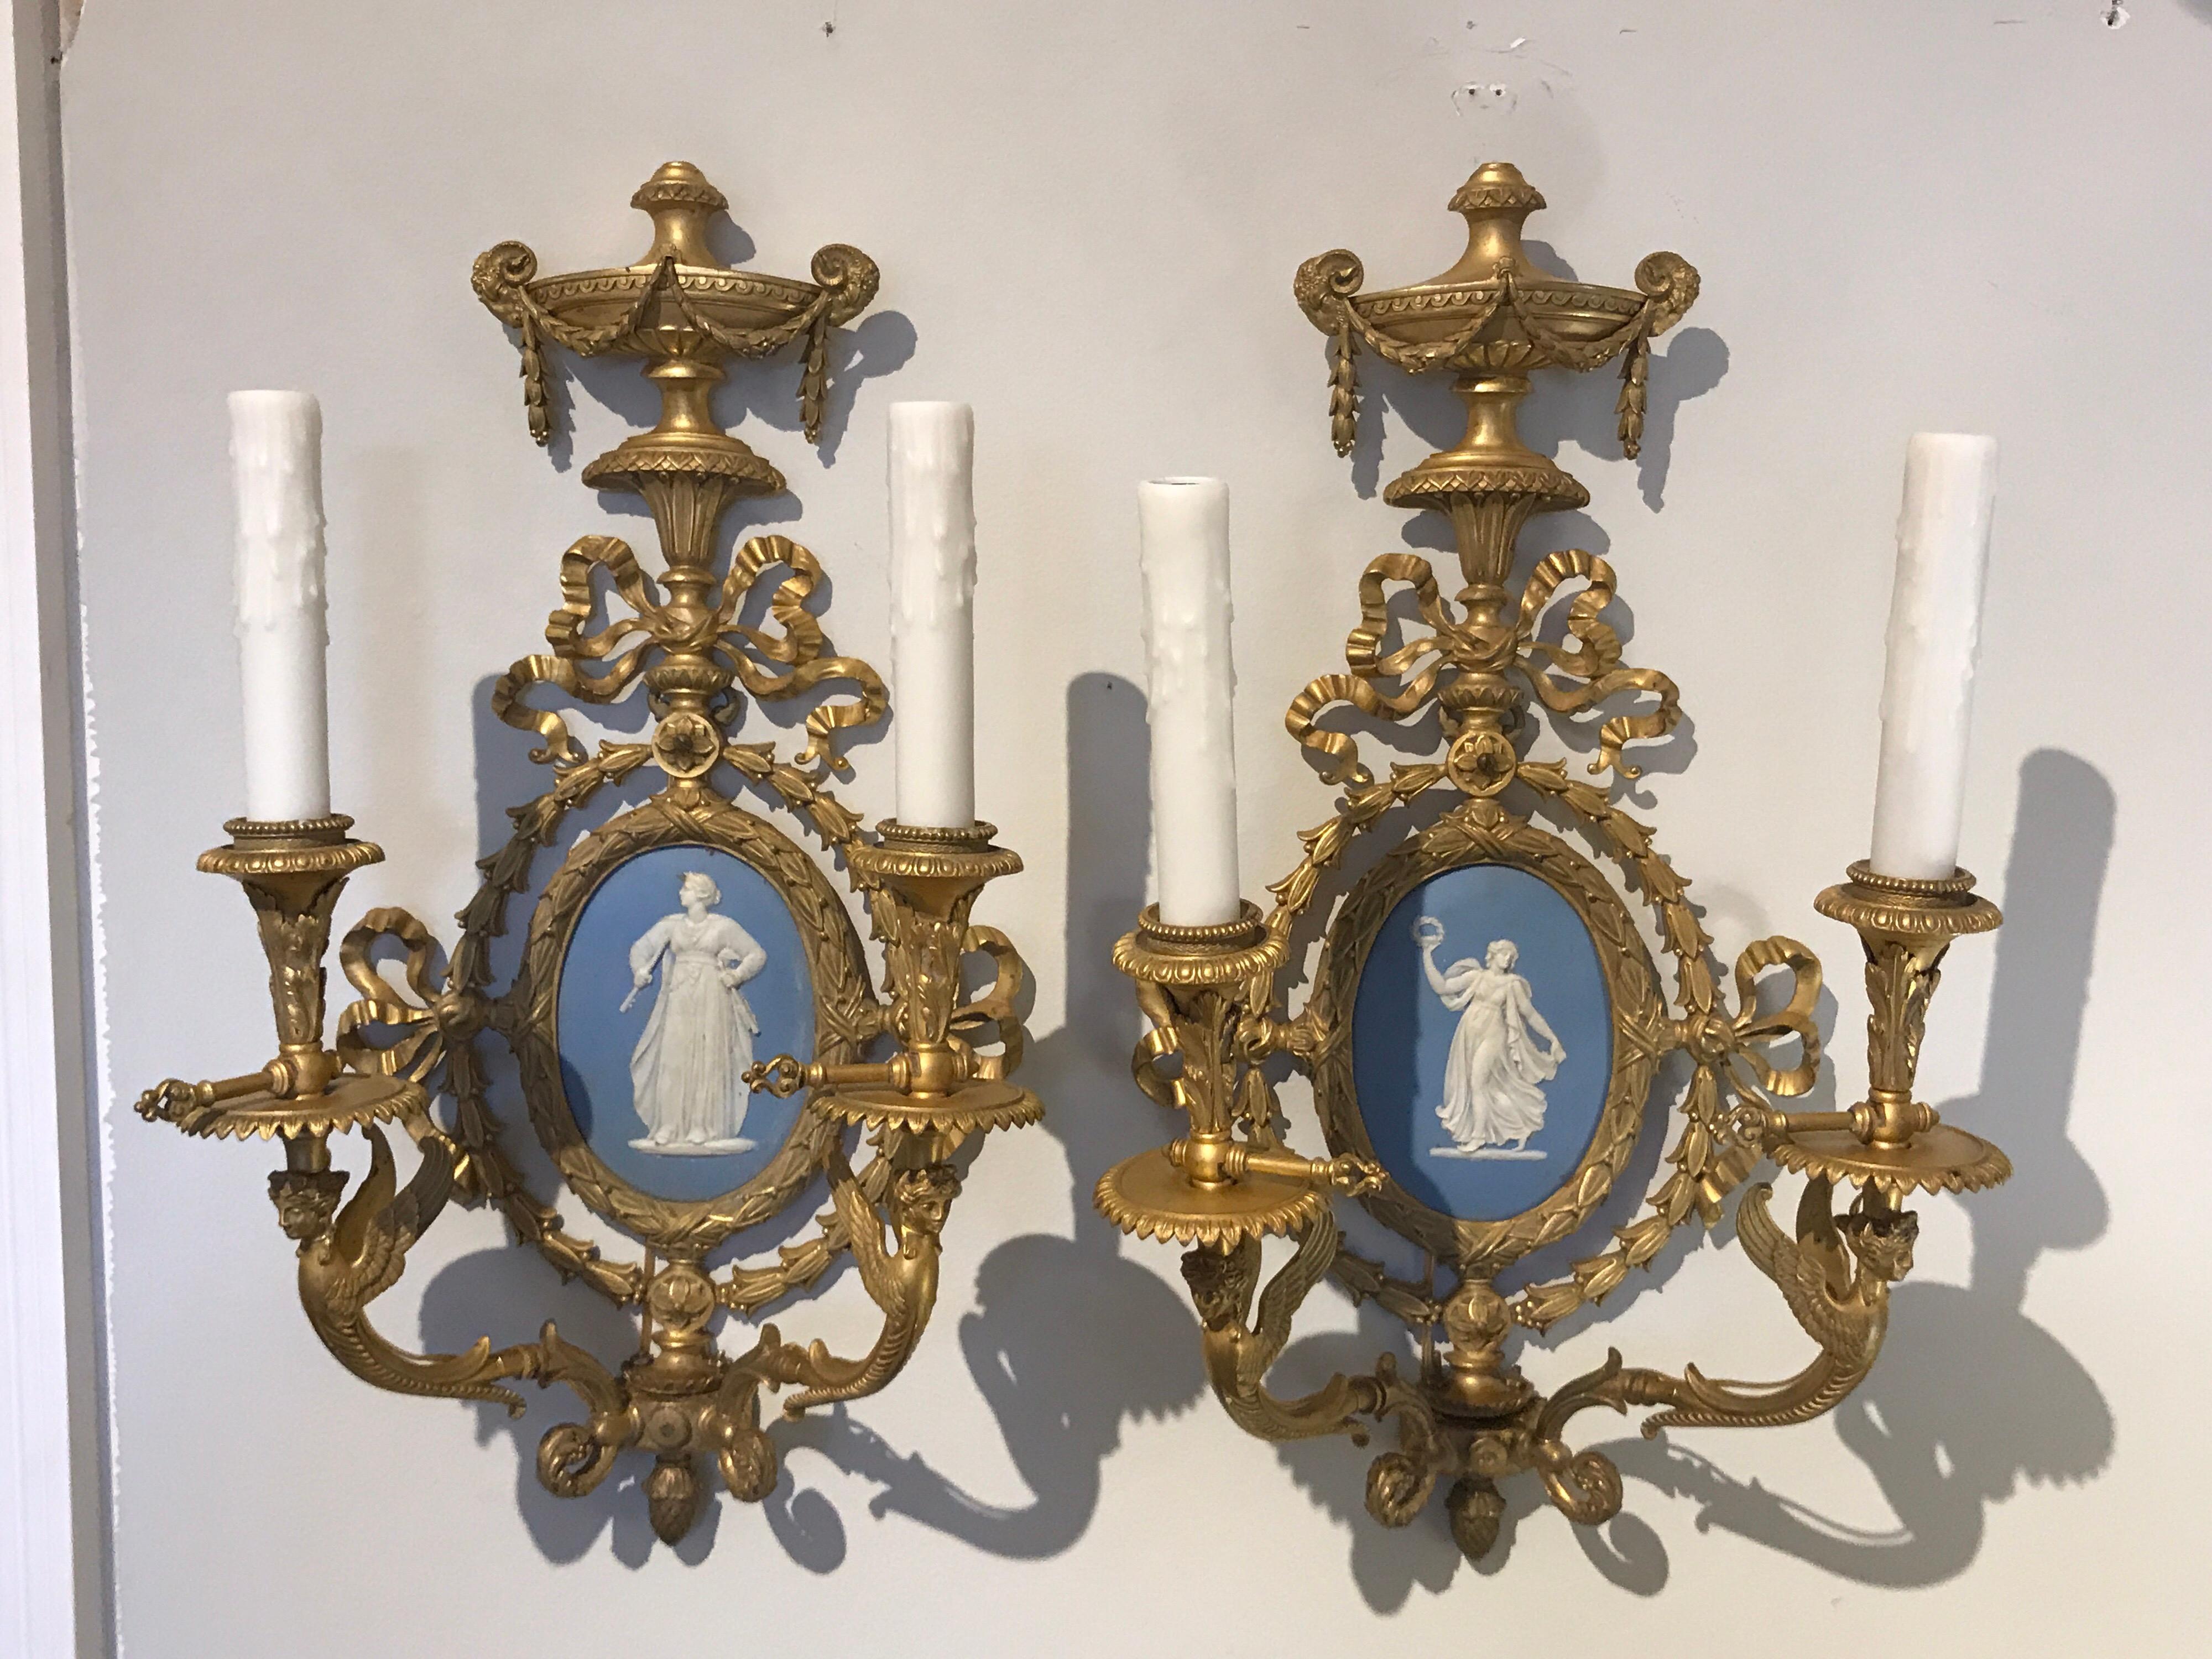 Pair of Exquisite Adam Style Ormolu Wall Sconces with Wedgwood Plaques In Good Condition For Sale In Atlanta, GA